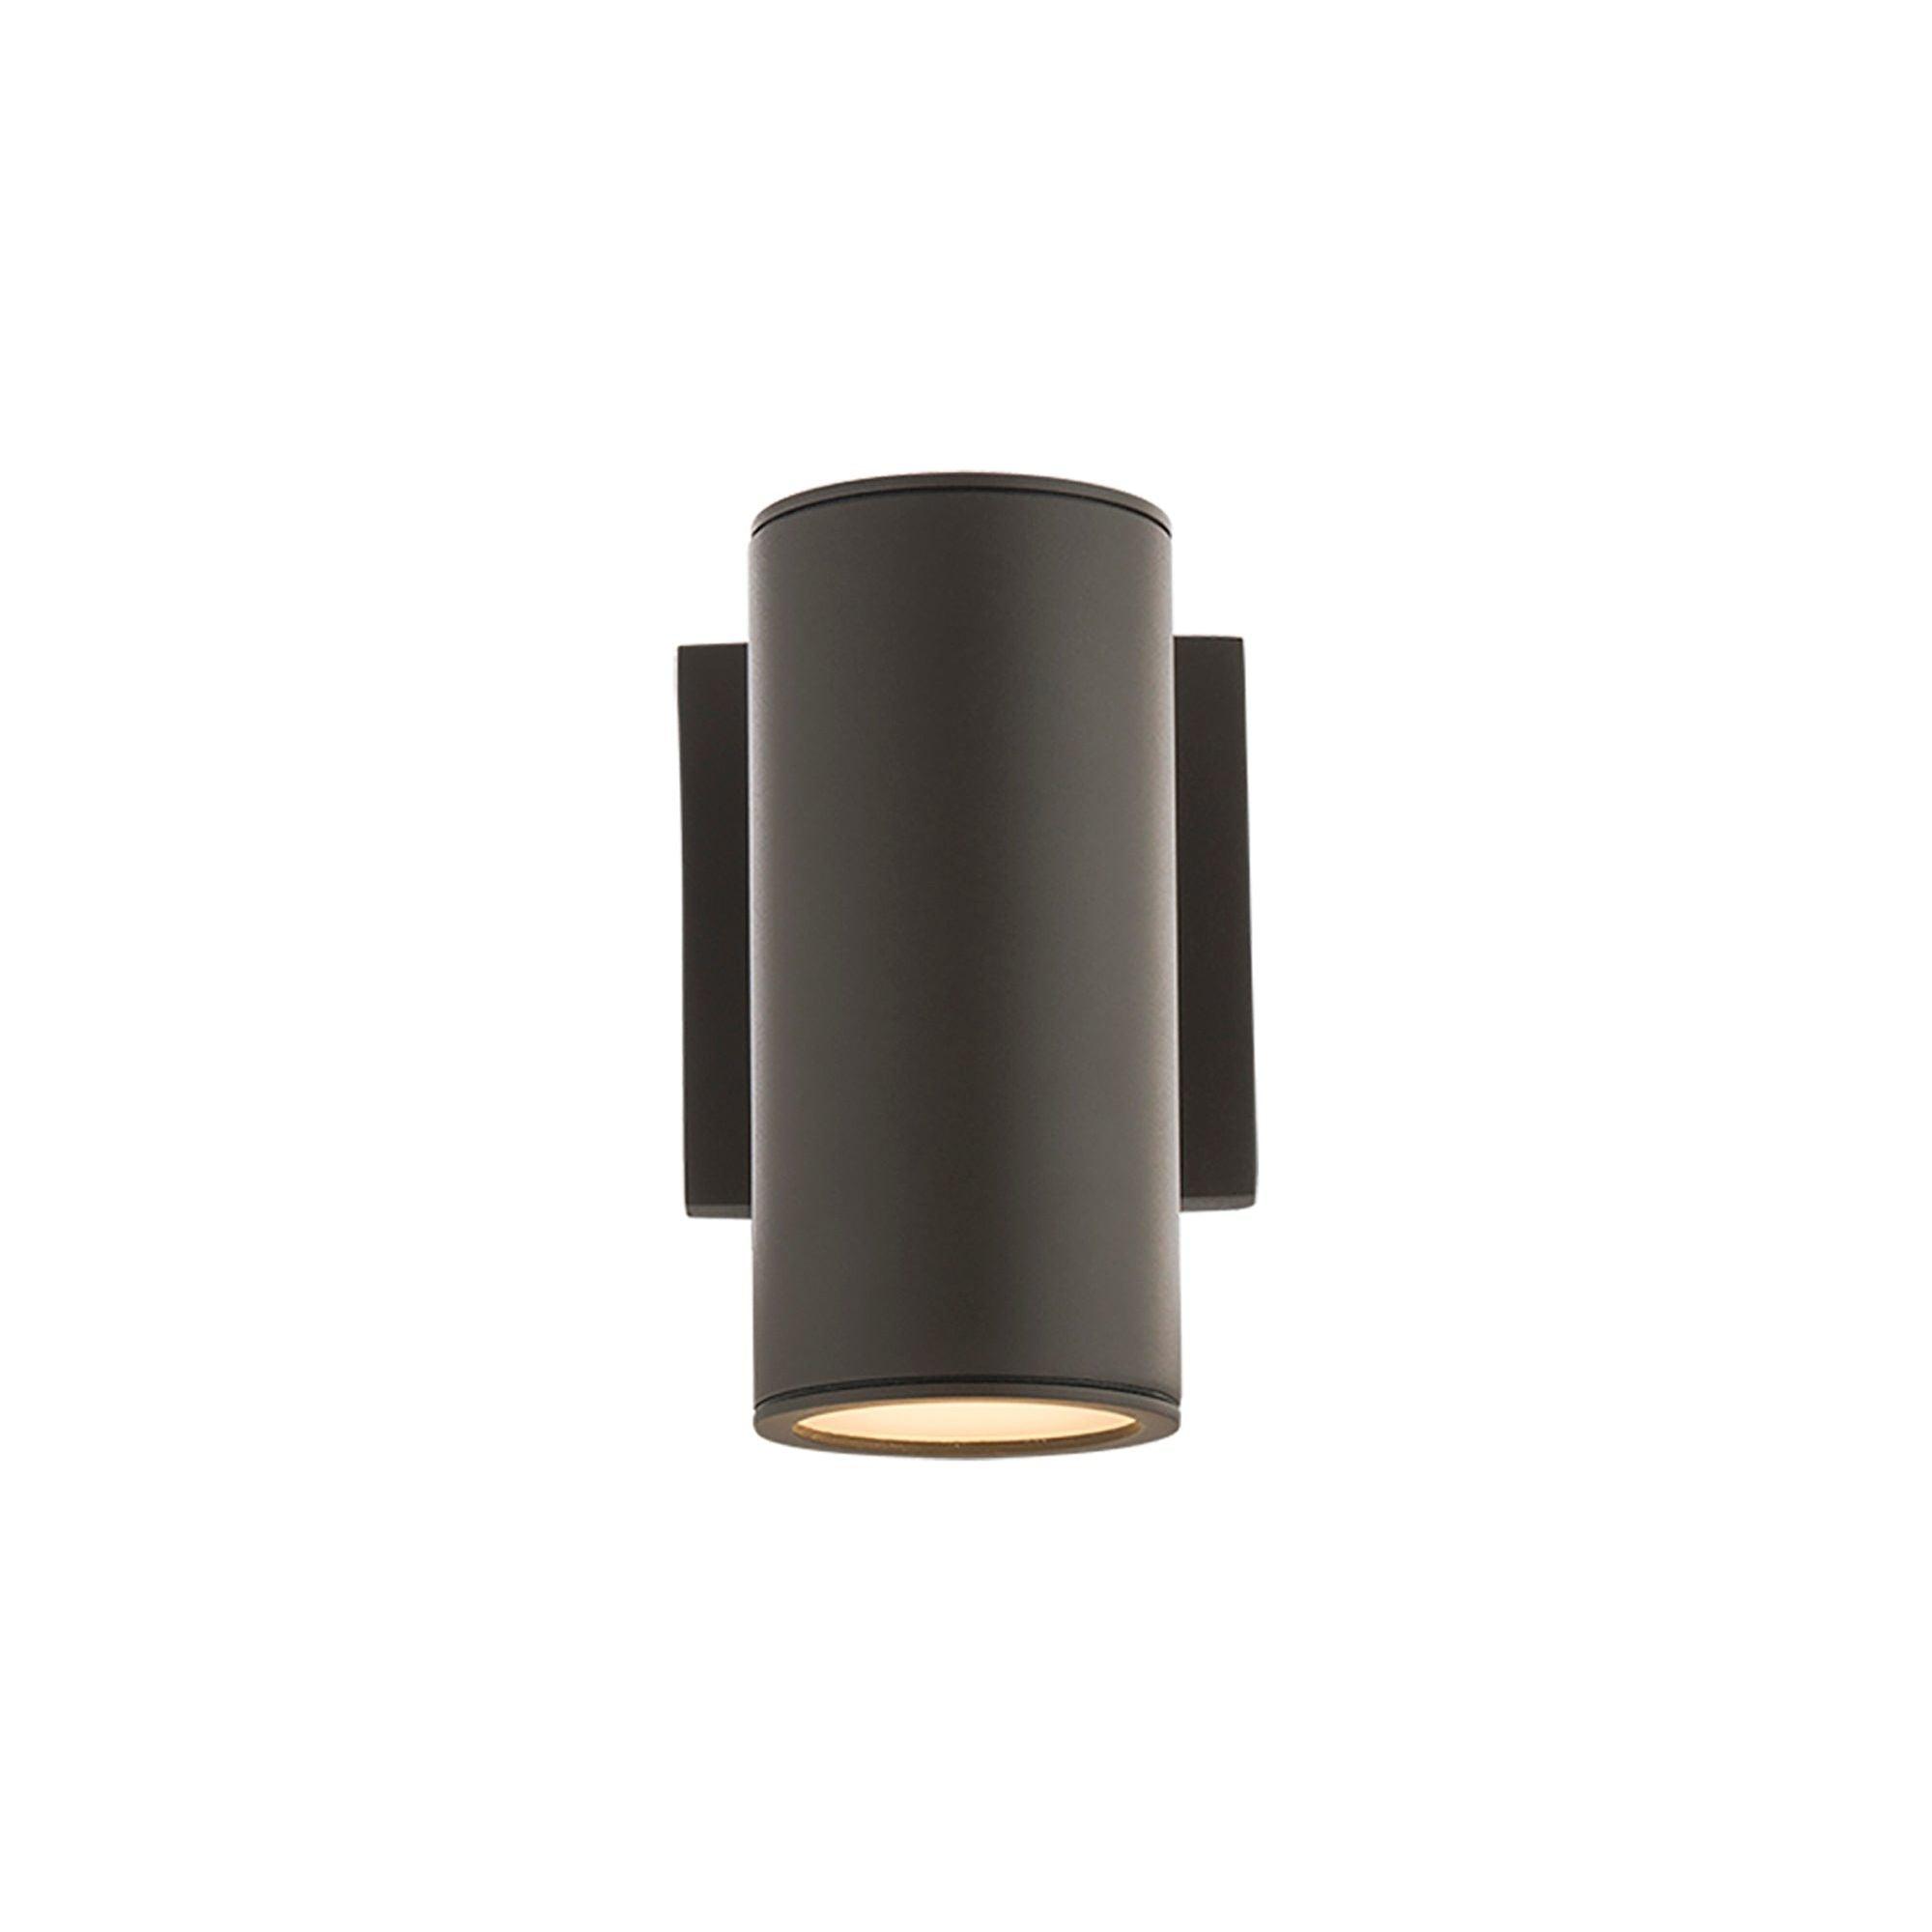 WAC Lighting - Cylinder LED Single Up or Down Indoor/Outdoor Wall Light - Lights Canada